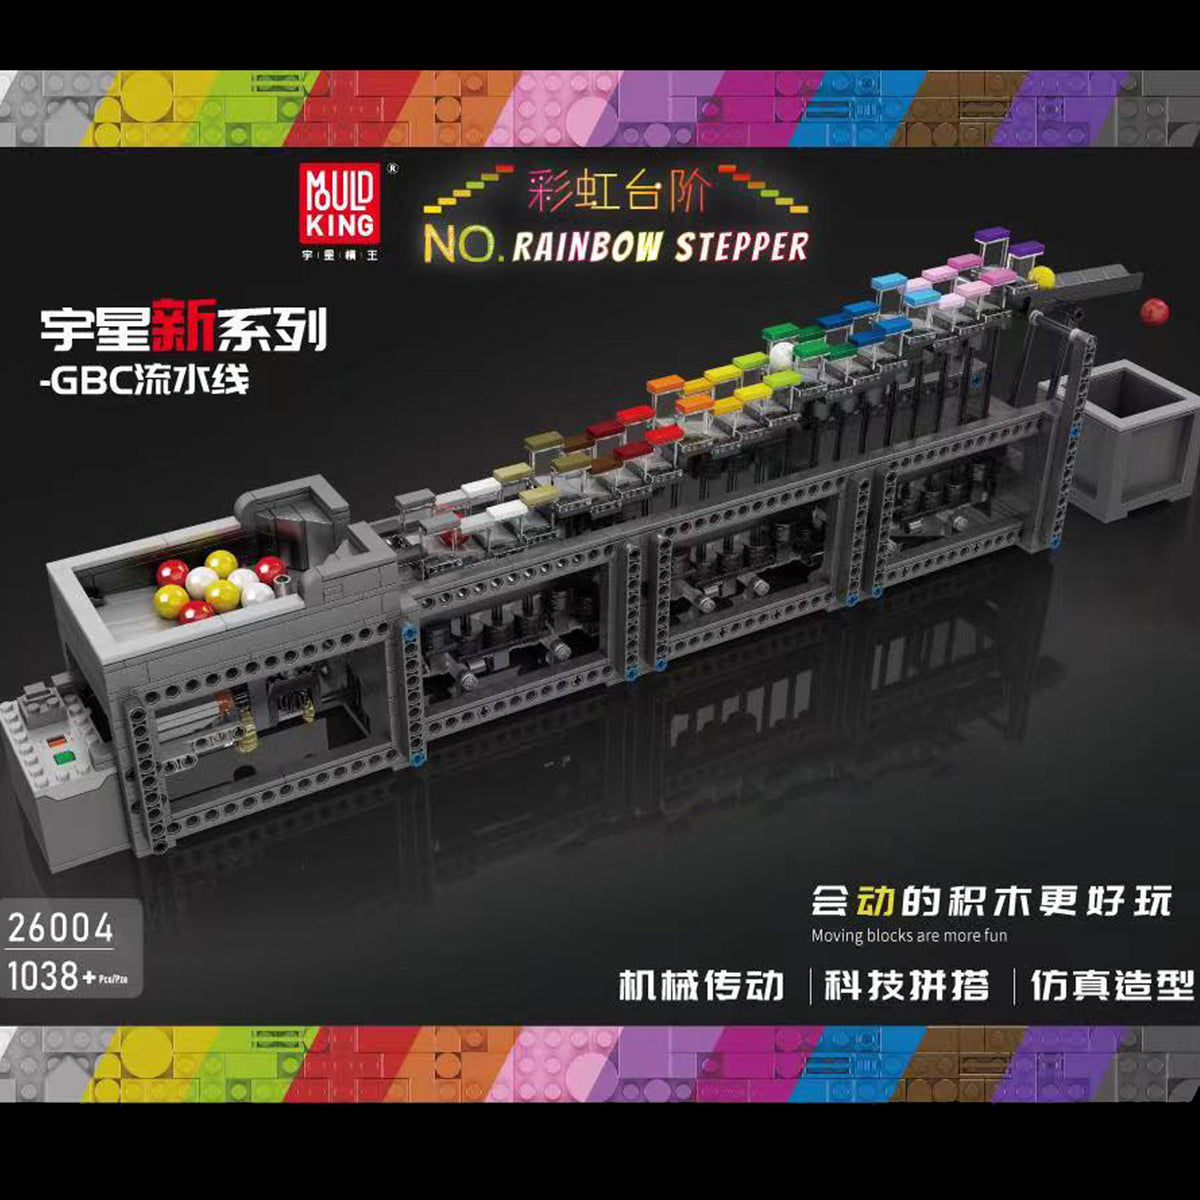 26004 - Rainbow Stepper (Mould King)